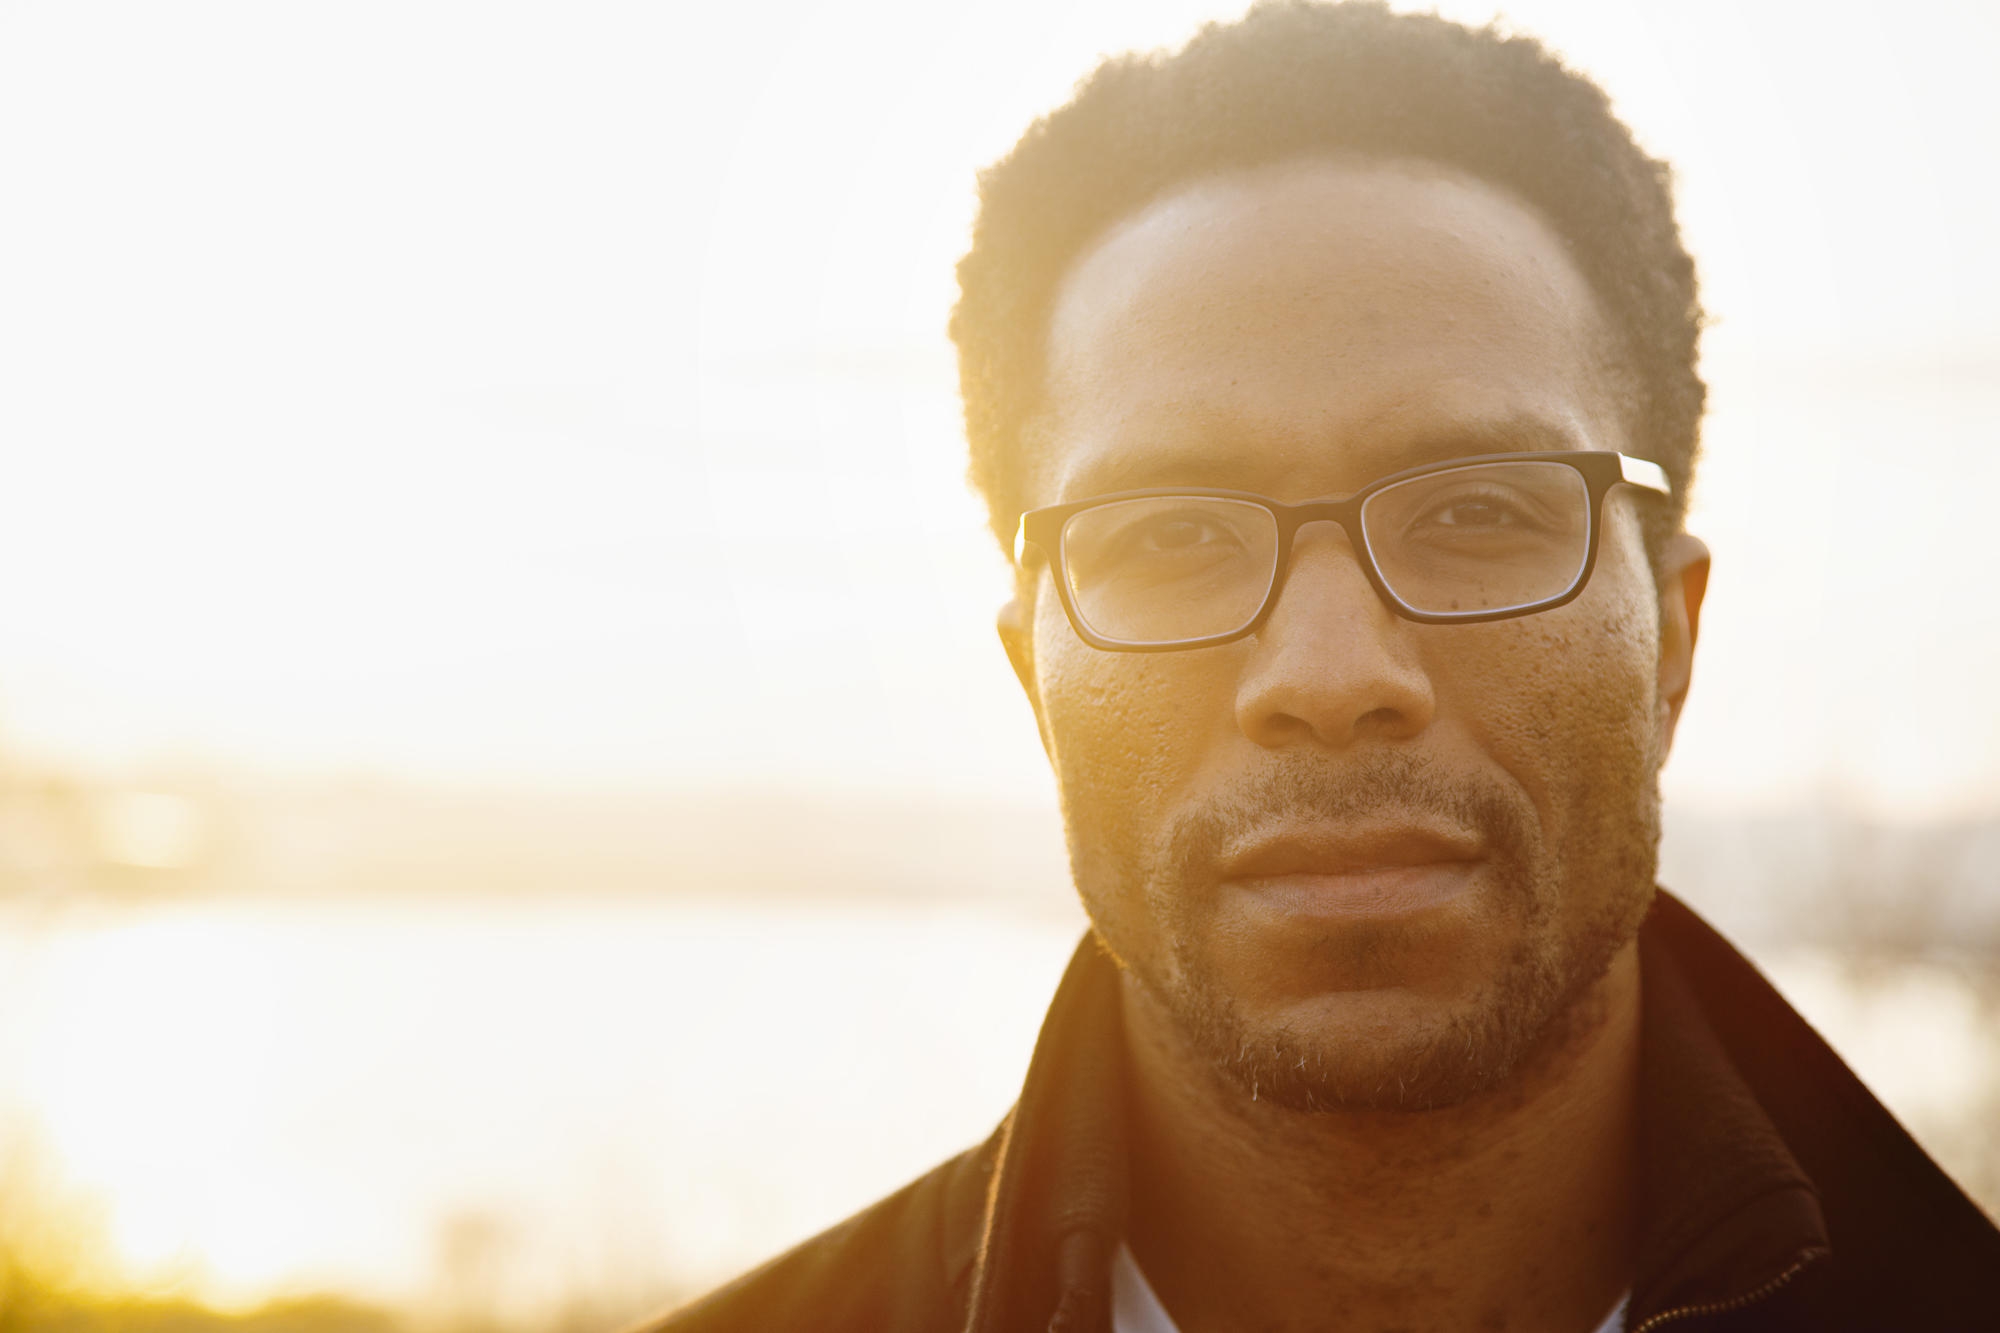 Headshot of man with glasses. Sunset with blurred background.